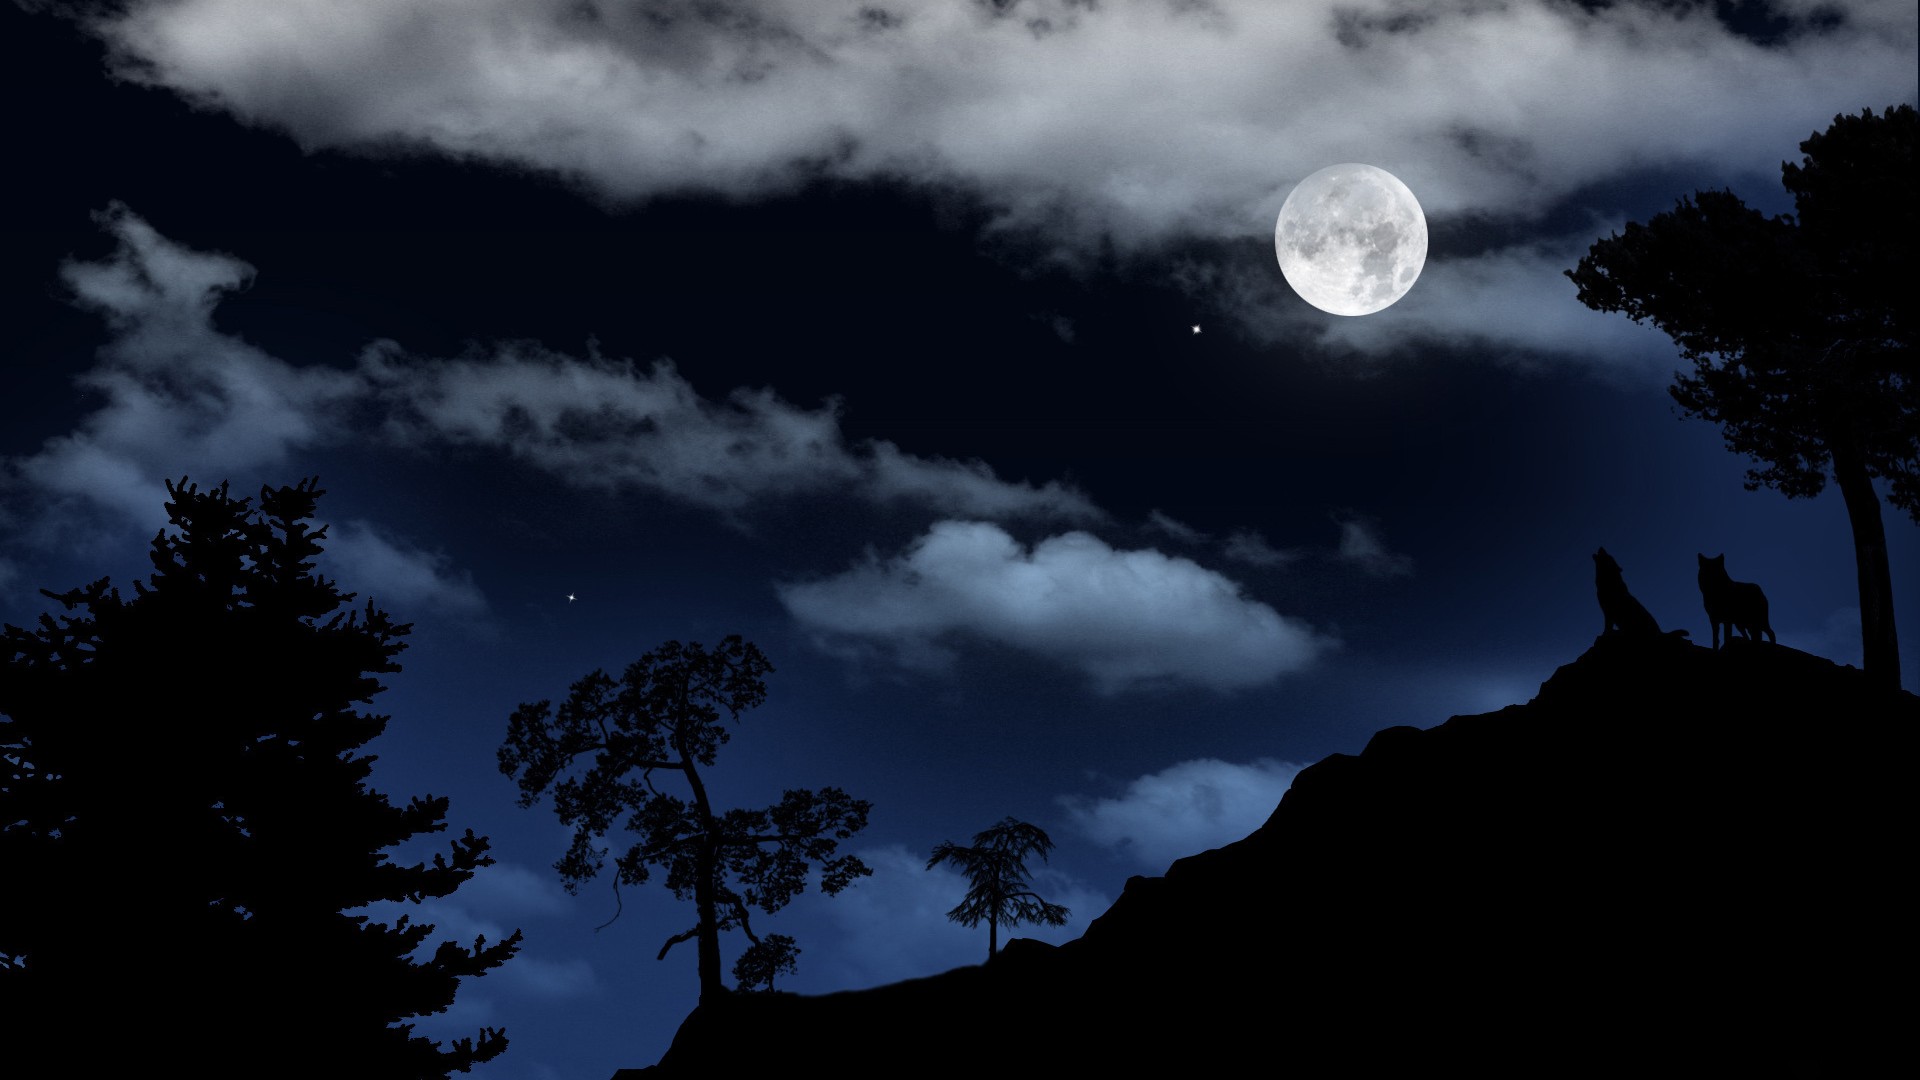 Moonlight Wallpapers | Fantasy Wallpapers Gallery - PC ...